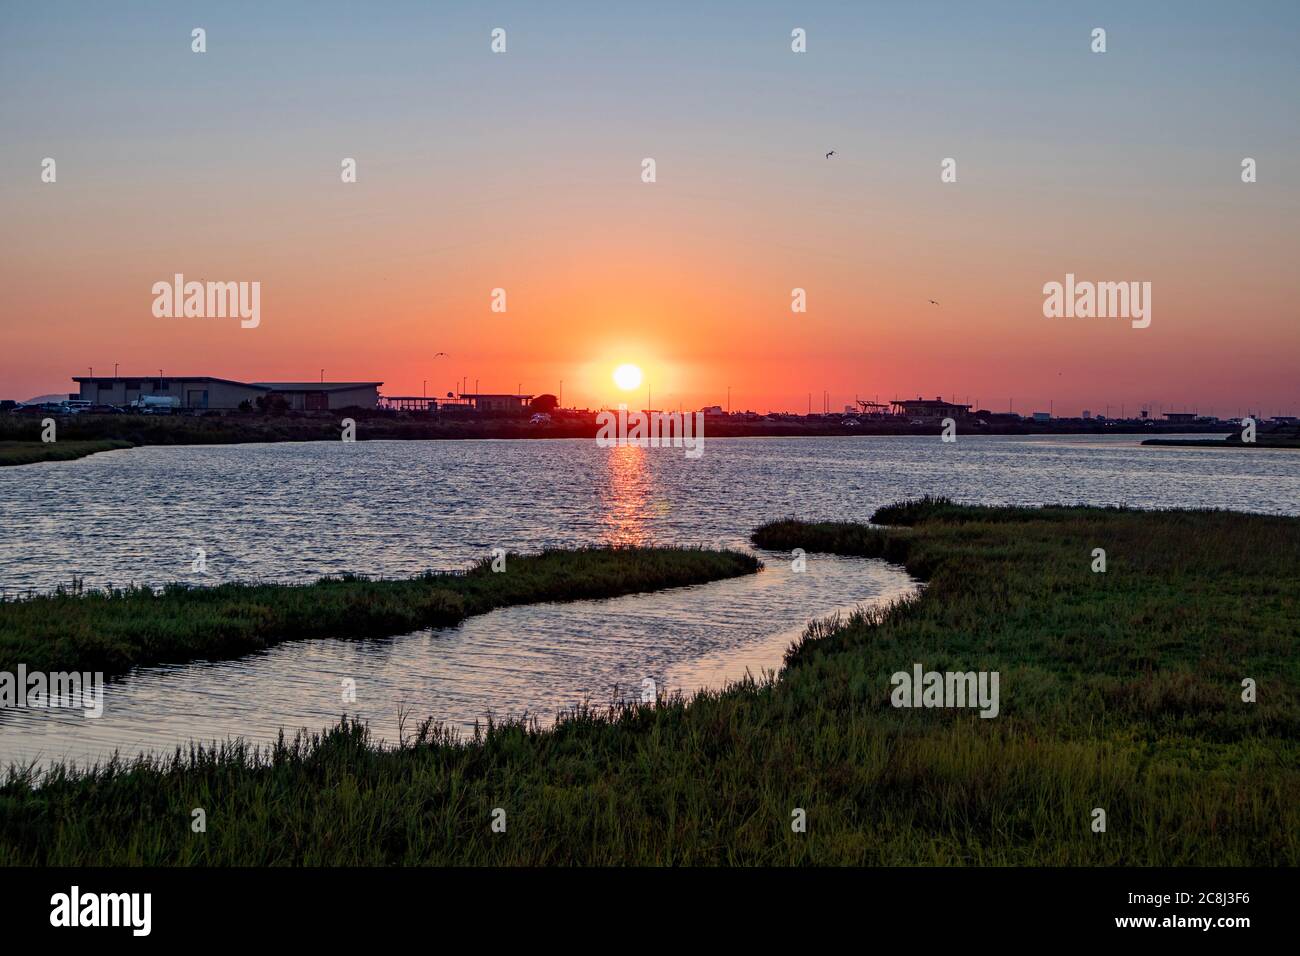 Sunset over wetlands and marsh taken at Bolsa Chica Wetland and Ecological Reserve in Huntington Beach, California, USA Stock Photo